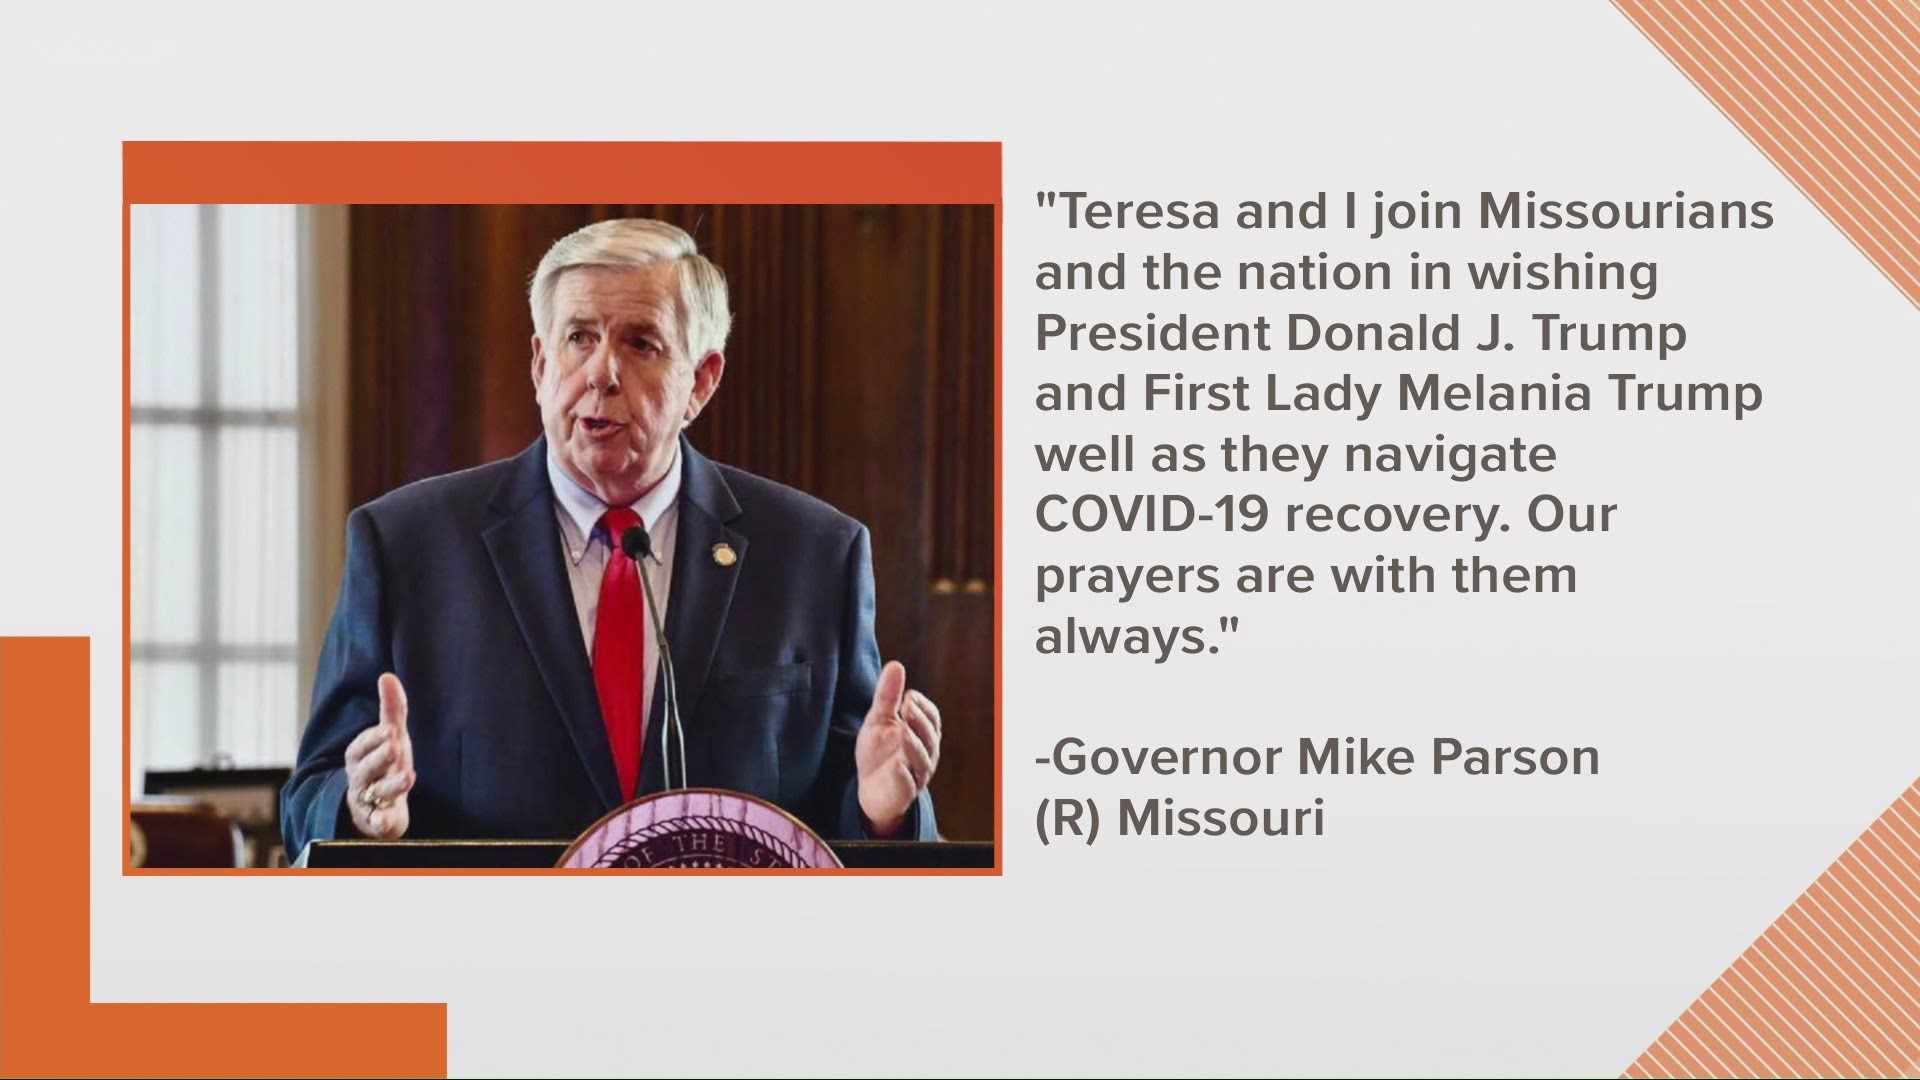 The Missouri Governor wished the President well, as he and his wife are also recovering from COVID-19